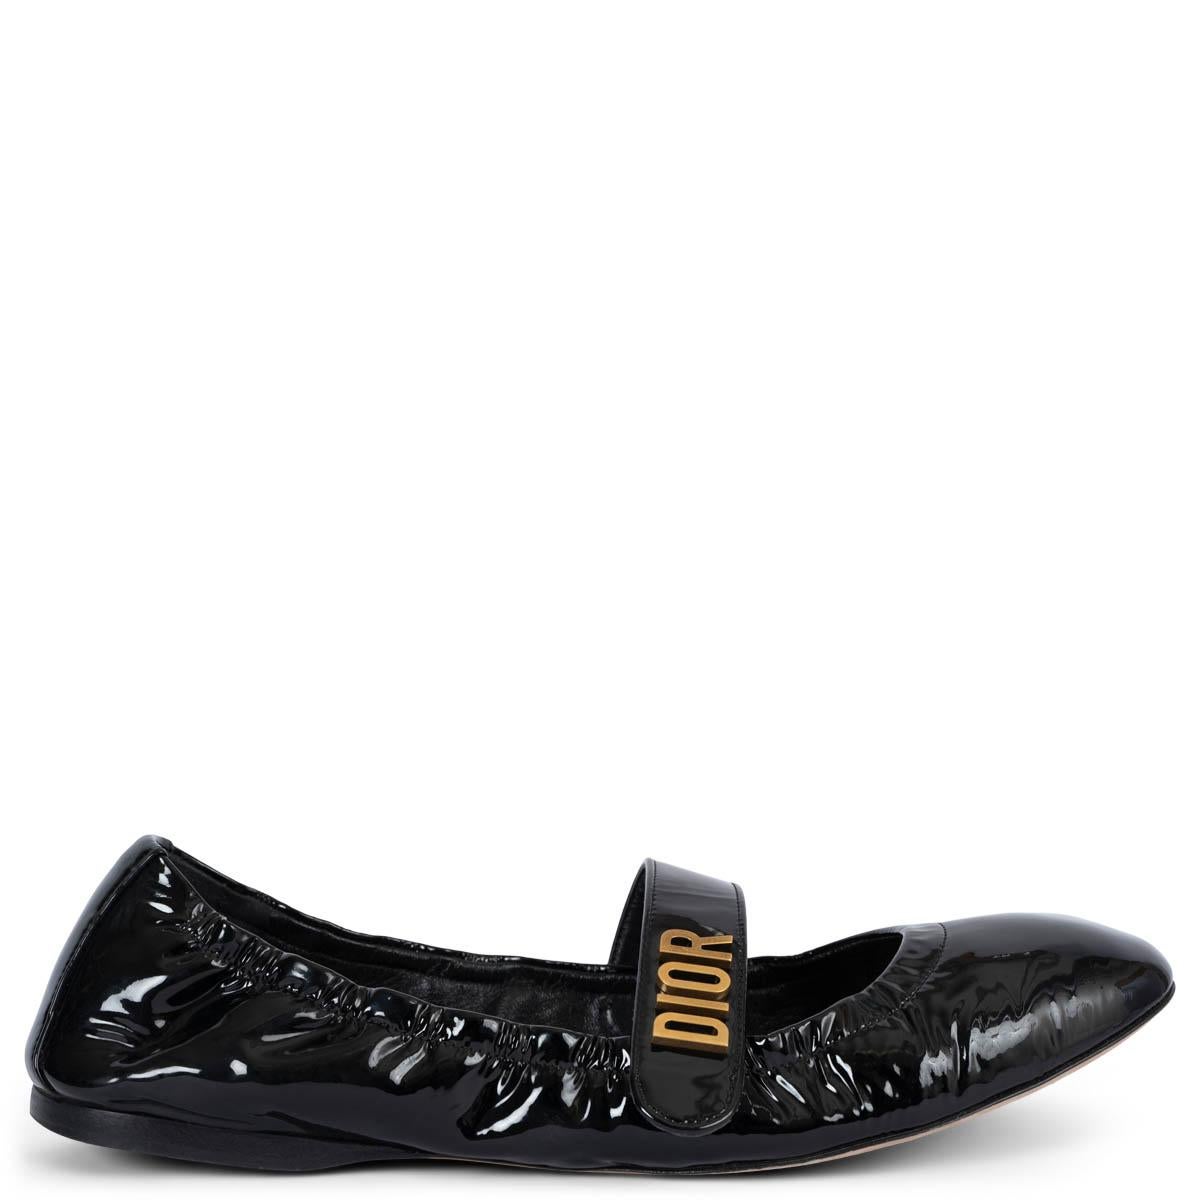 CHRISTIAN DIOR black patent leather BABY-D BALLET Flats Shoes 39 For Sale